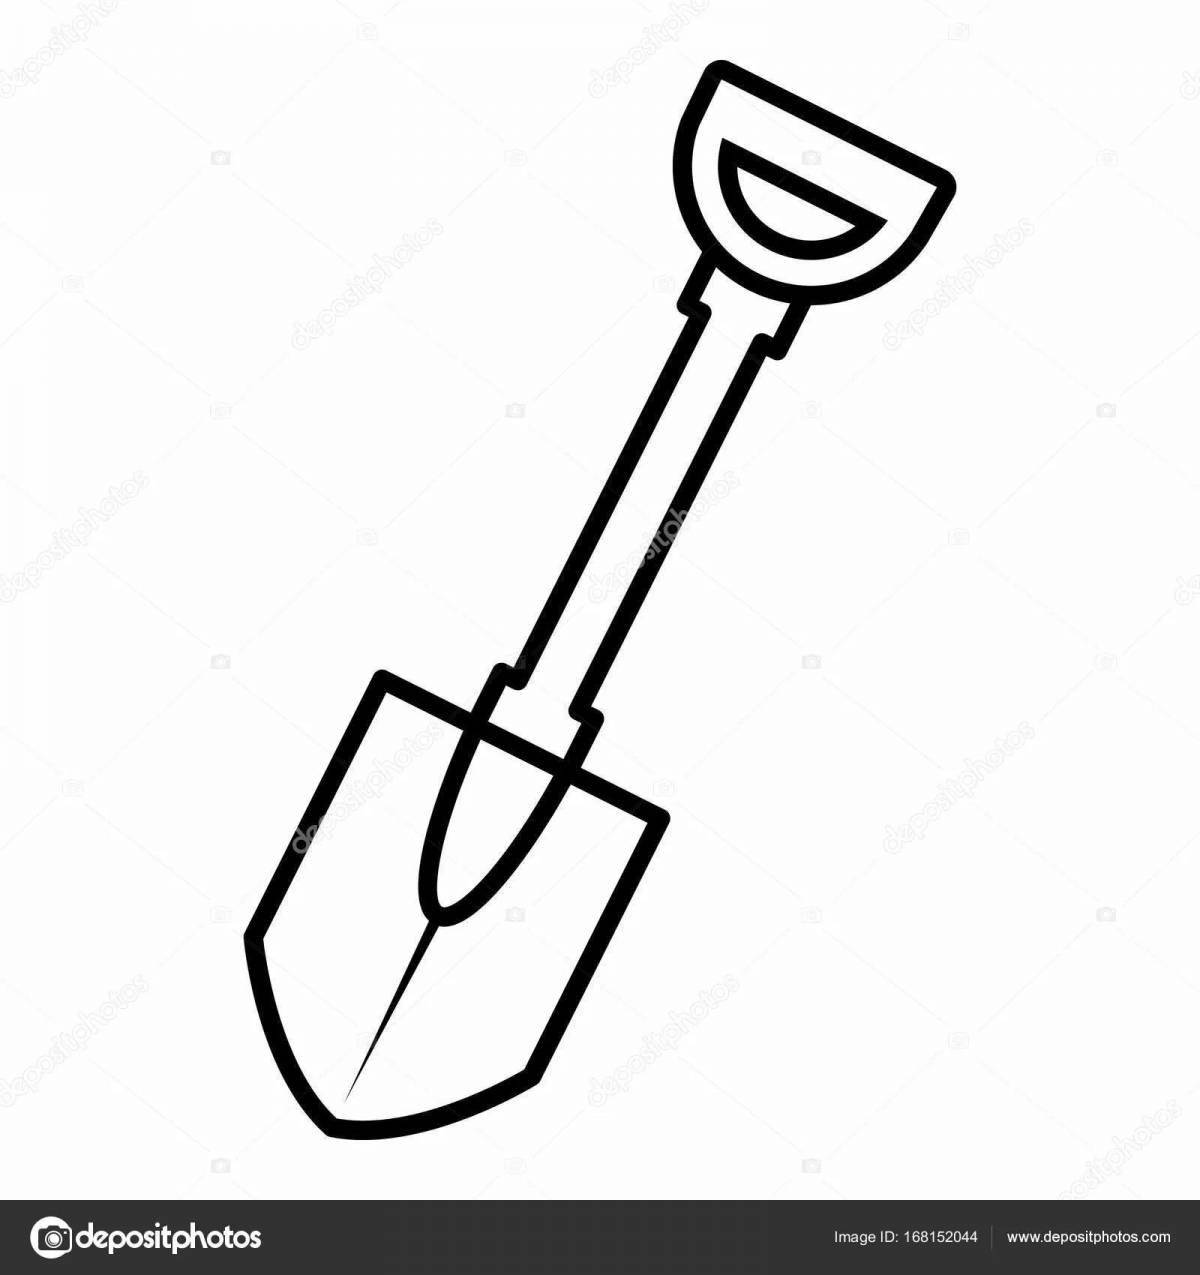 Amazing coloring pages with a shovel for kids